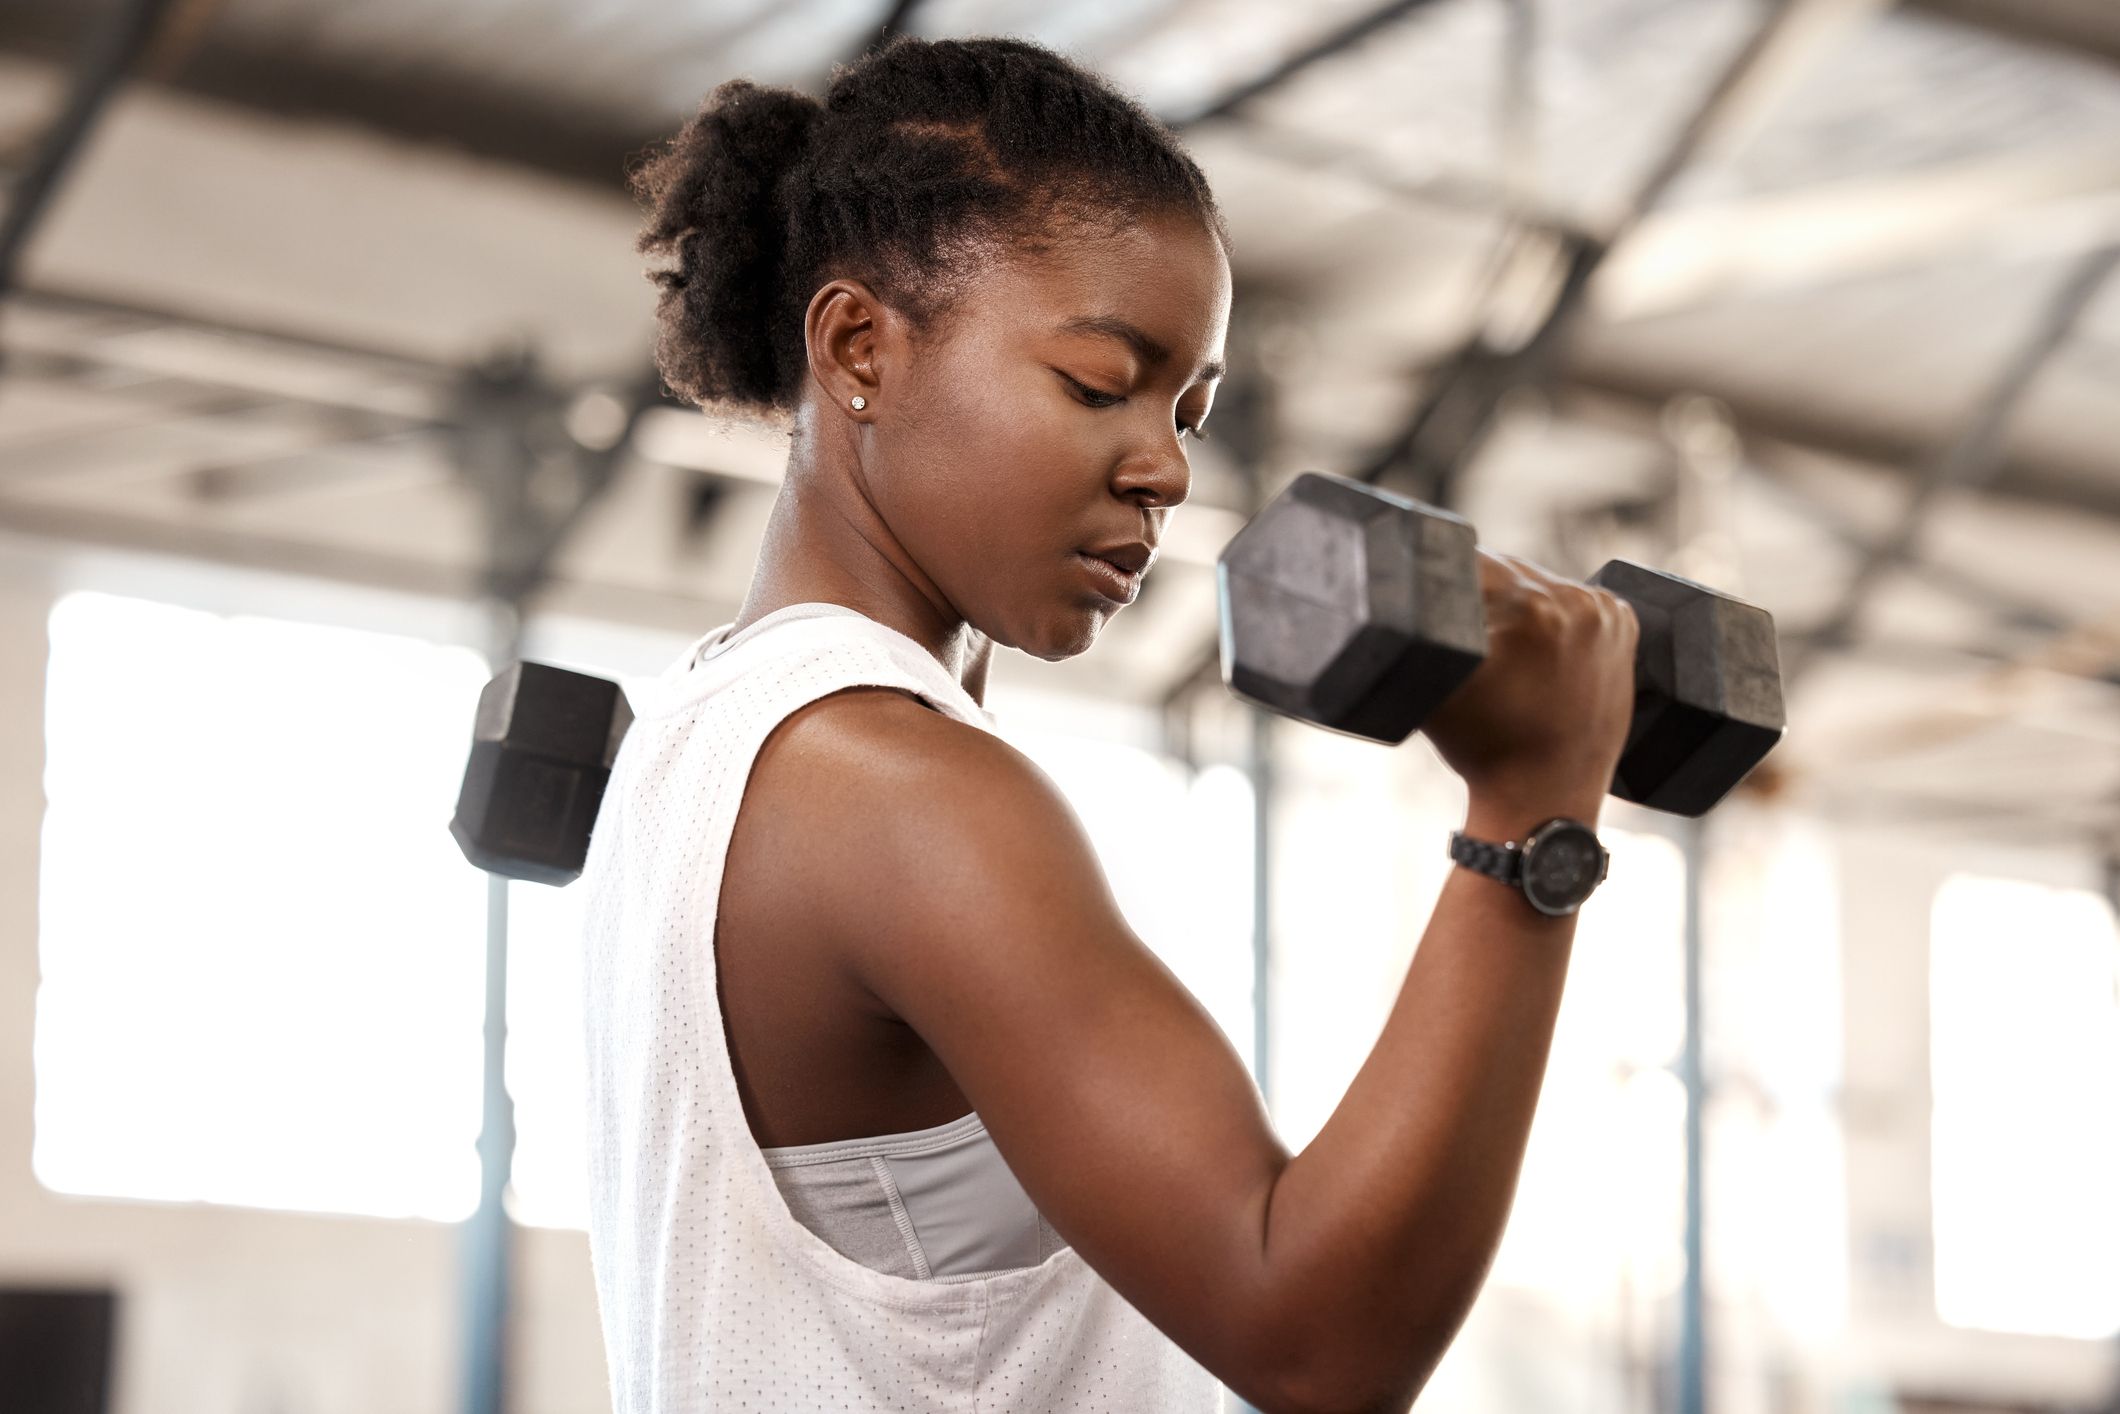 Weights for Women Part 3: Beginners Guide to Strength Training & Equipment  - BASE BODY BABES